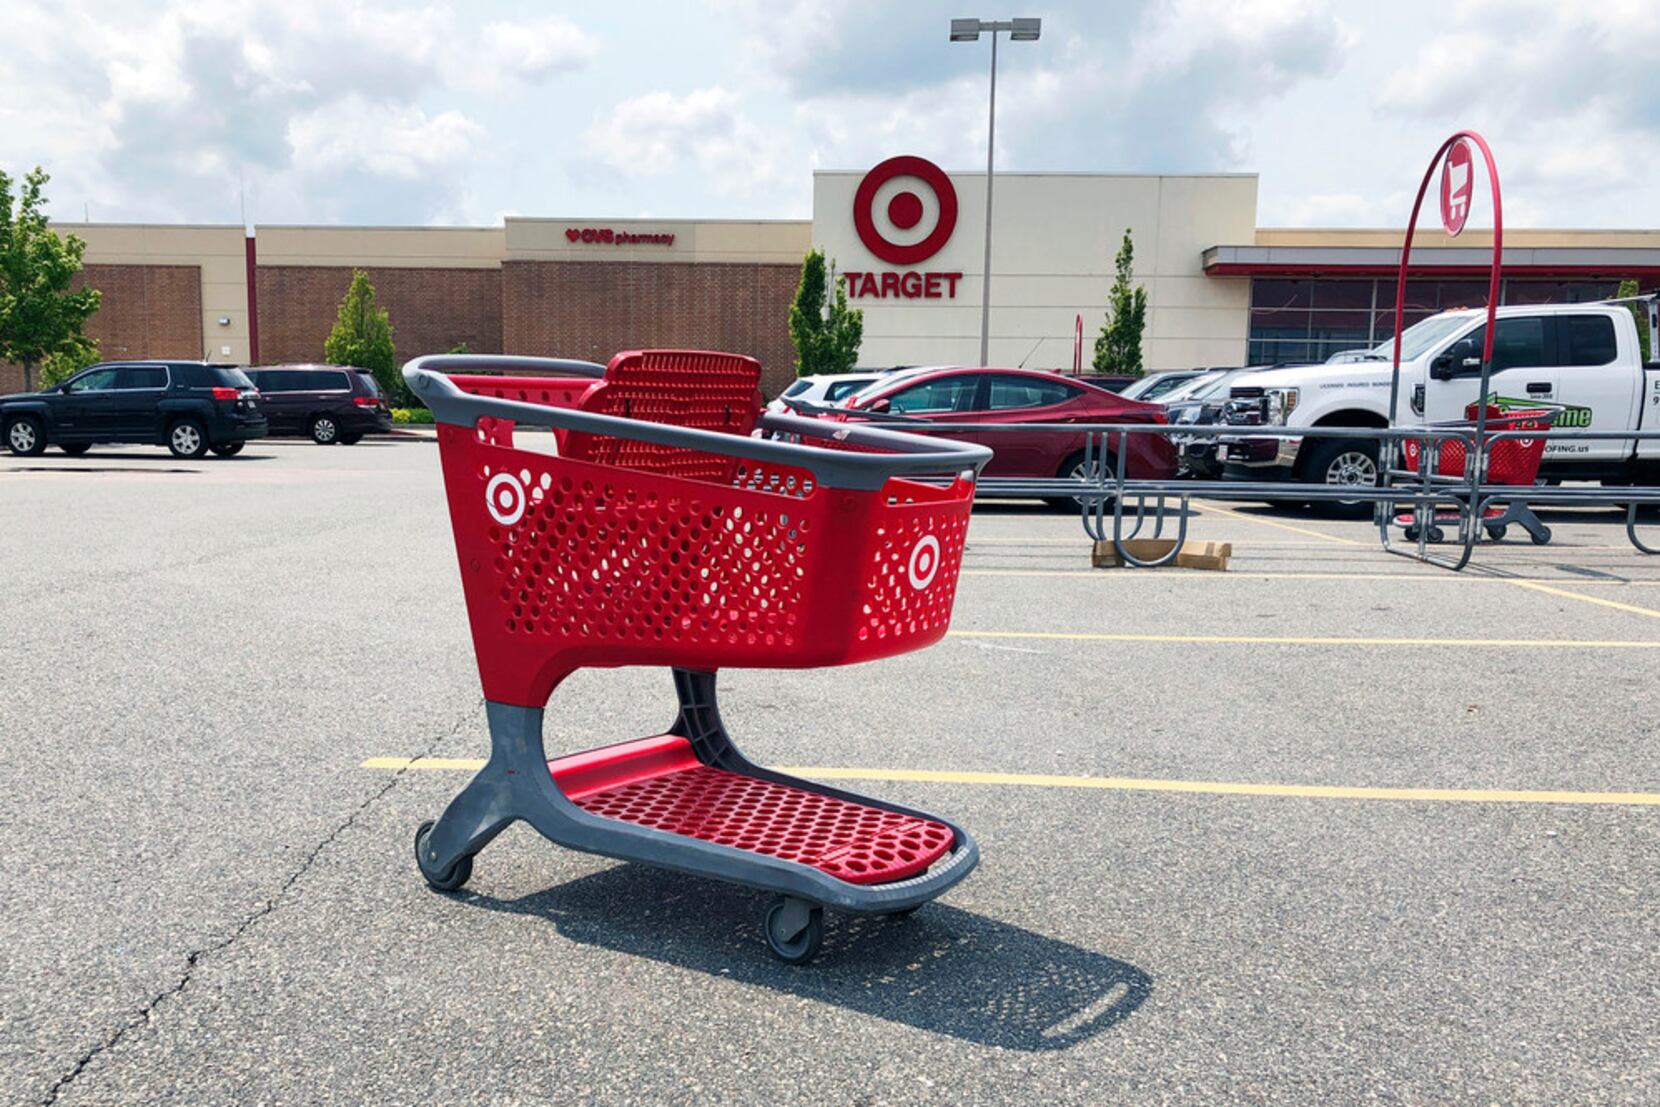 How the Retail Partnerships at Target and Kohl's are Faring - 